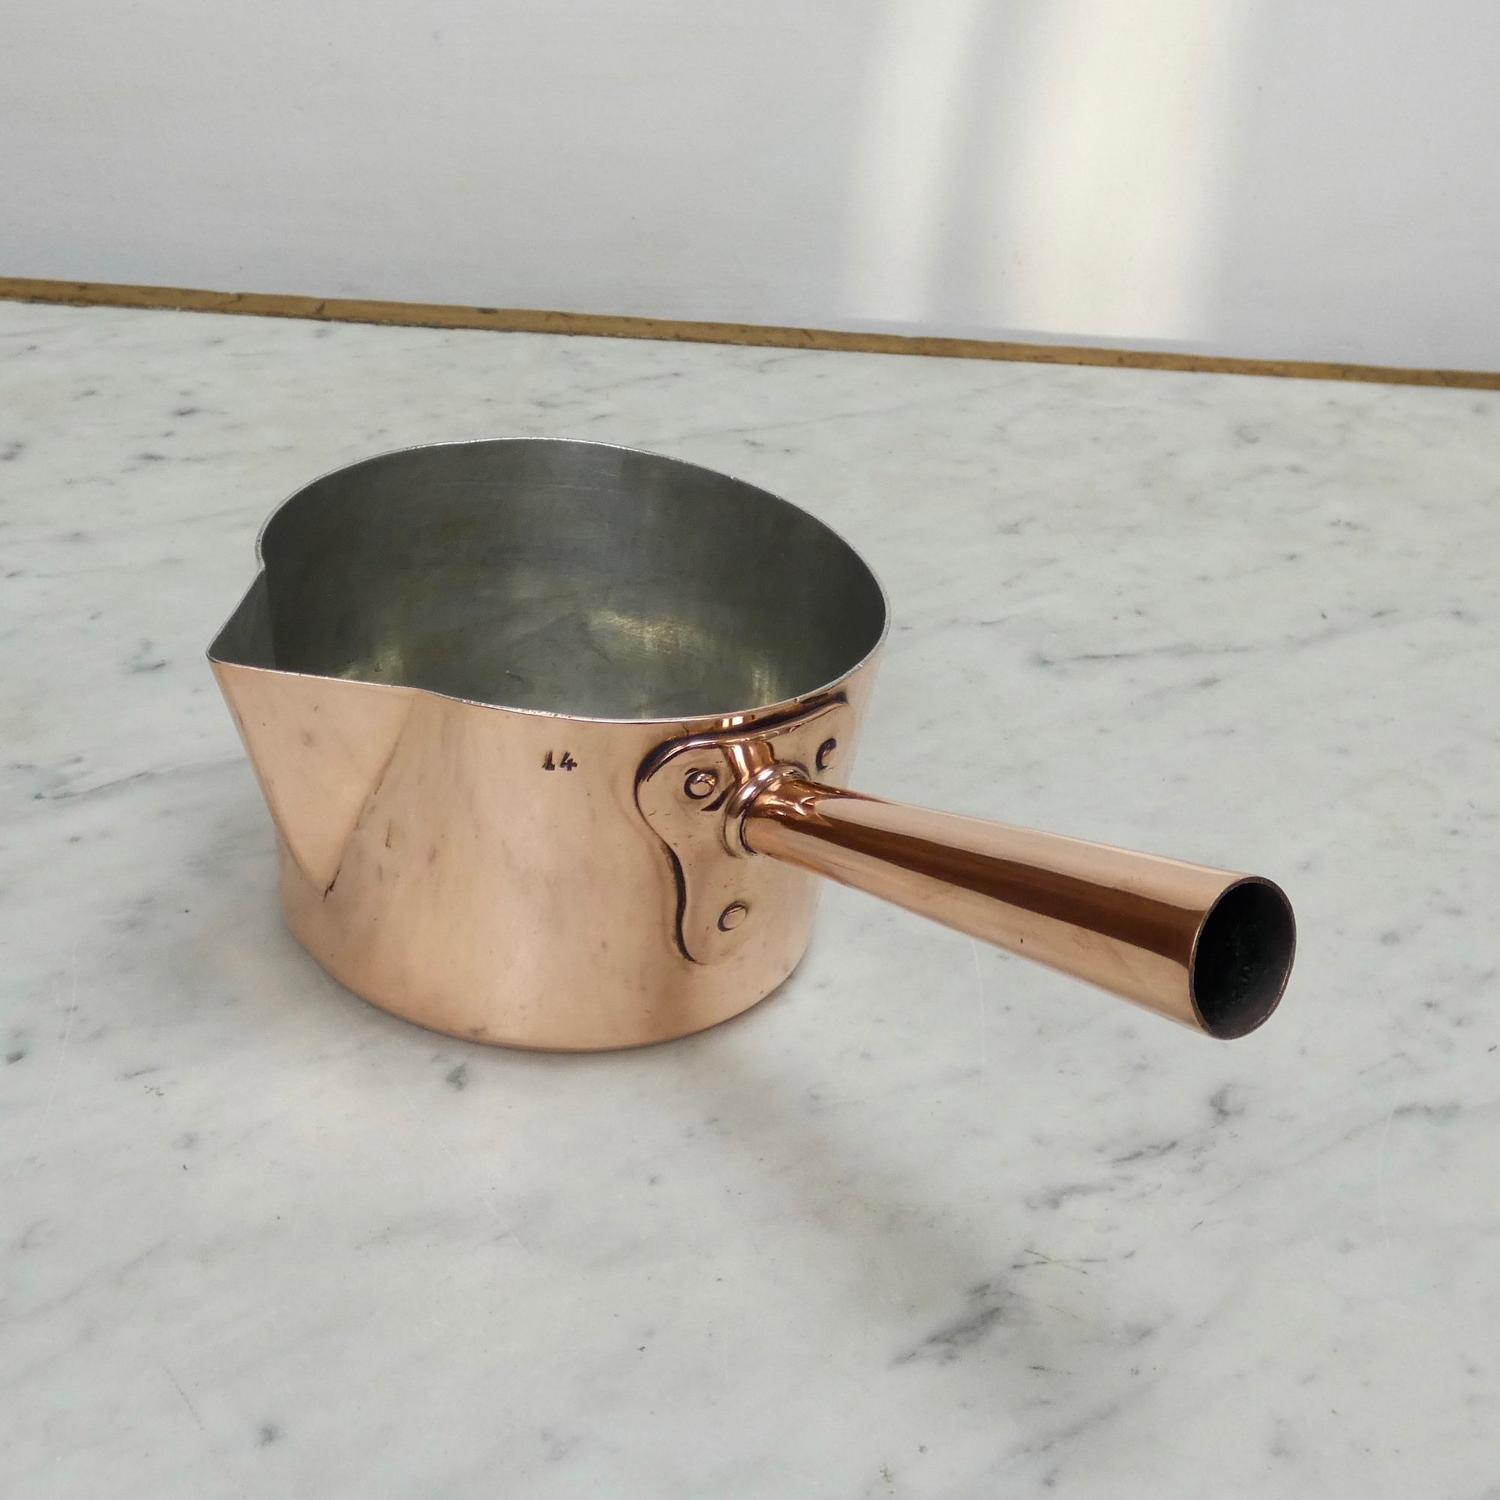 Copper pan with pouring spout